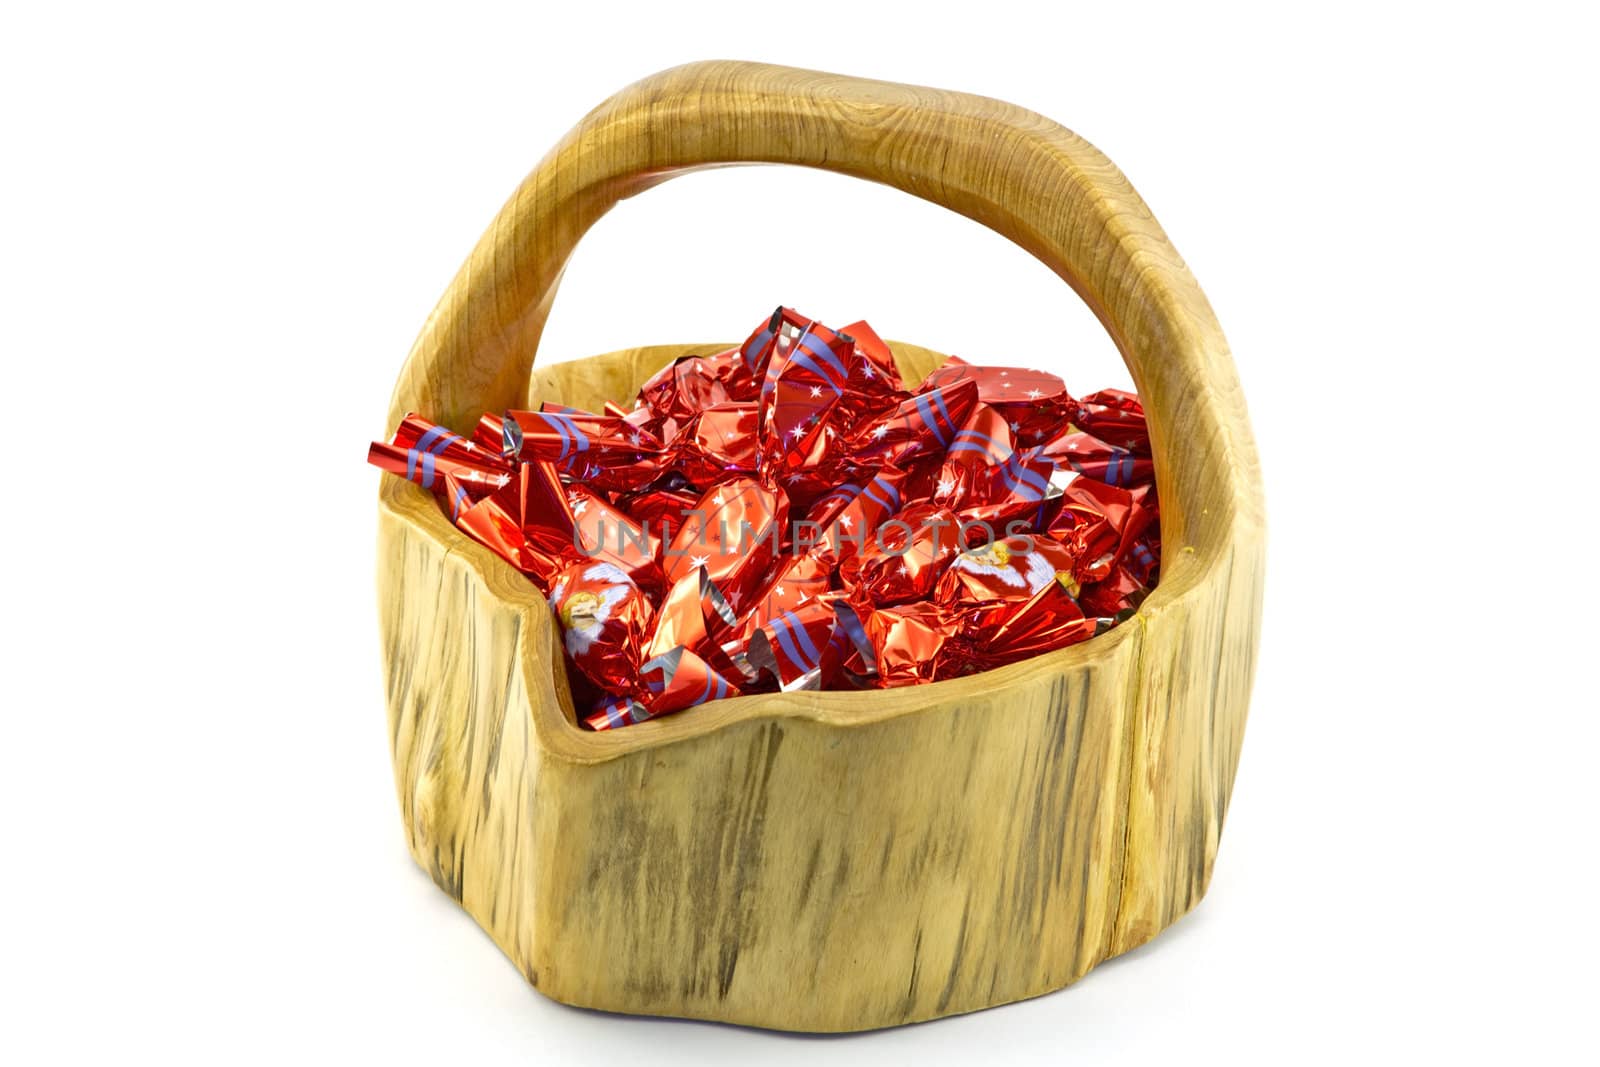 Red christmas pralines in a wooden basket on white background